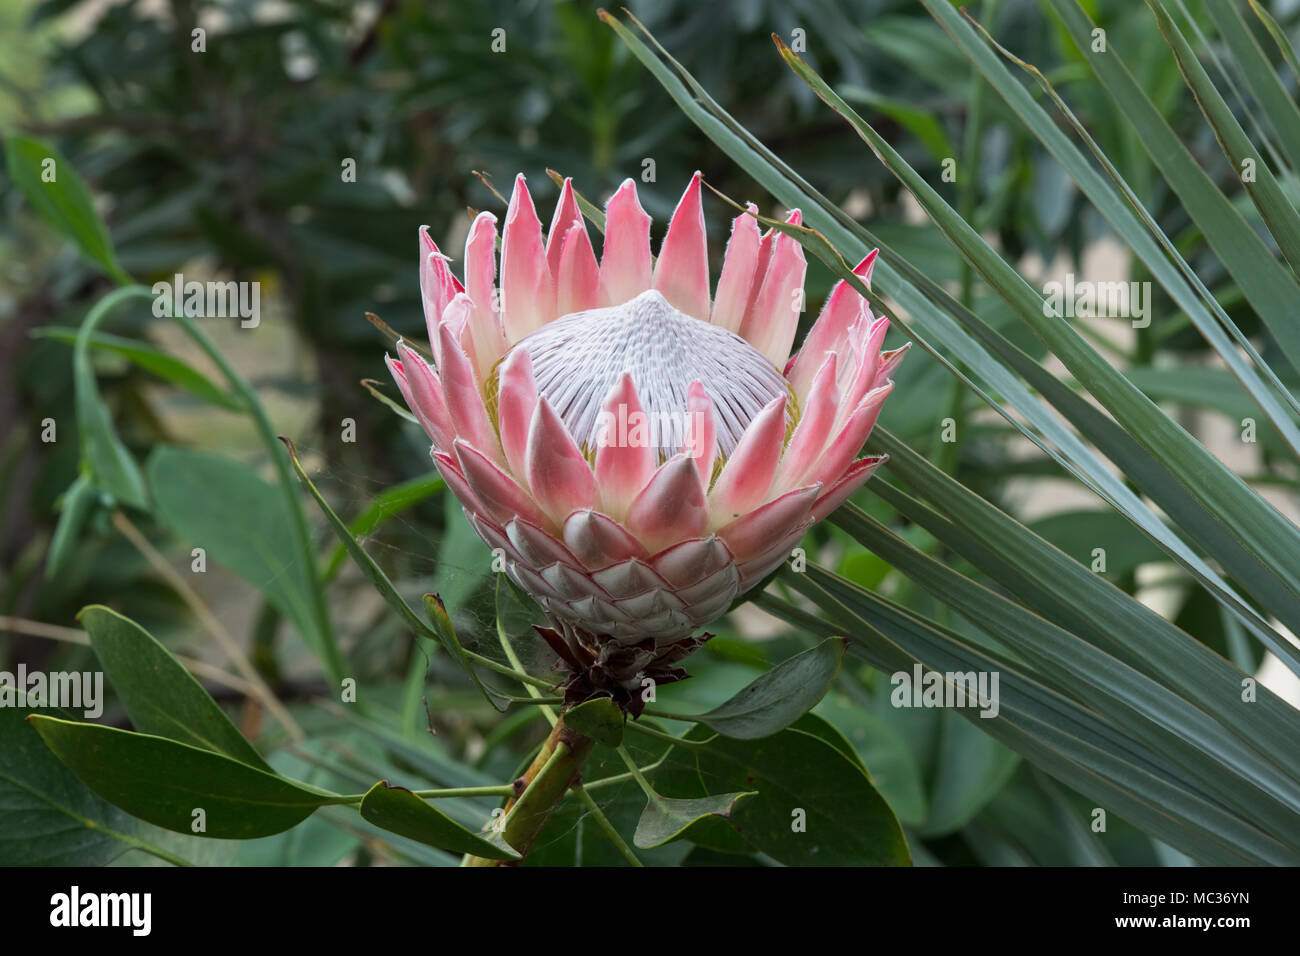 Protea cynaroides, The king protea flower inside the glasshouse at RHS Wisley gardens, Surrey, UK Stock Photo